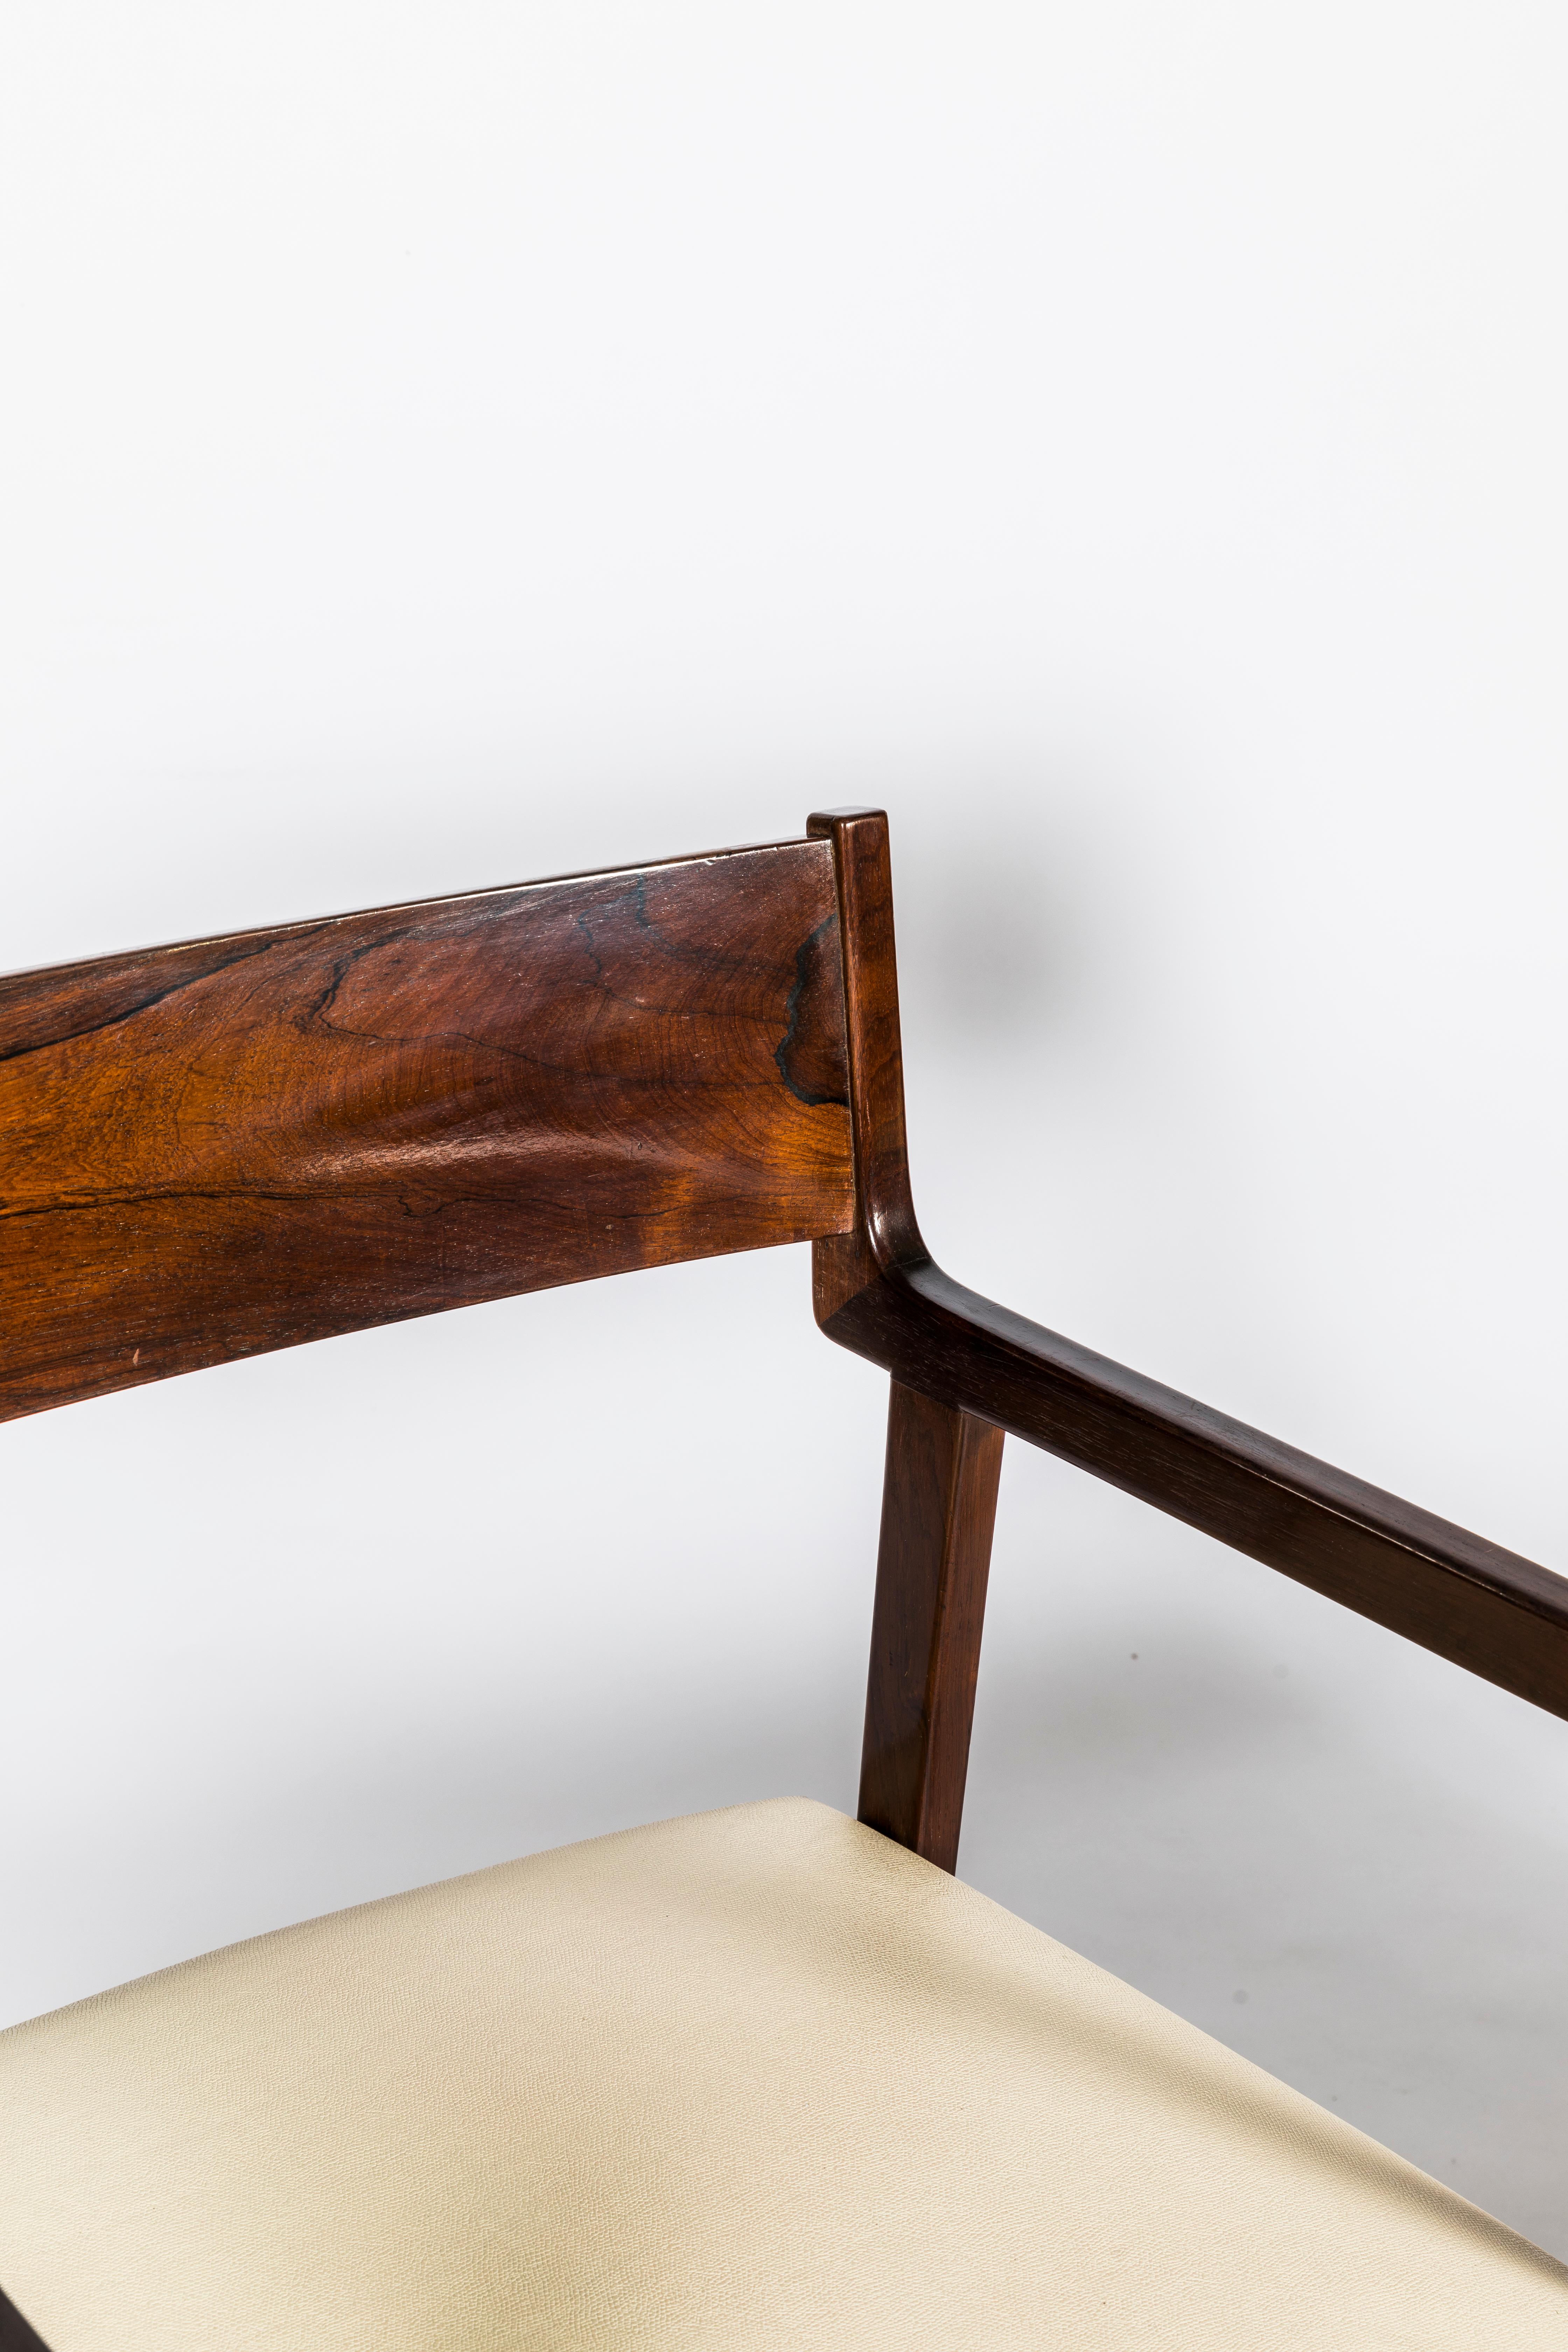 Mid-20th Century Pair of Armchairs by Joaquim Tenreiro, Wood and Leather, 1950 For Sale